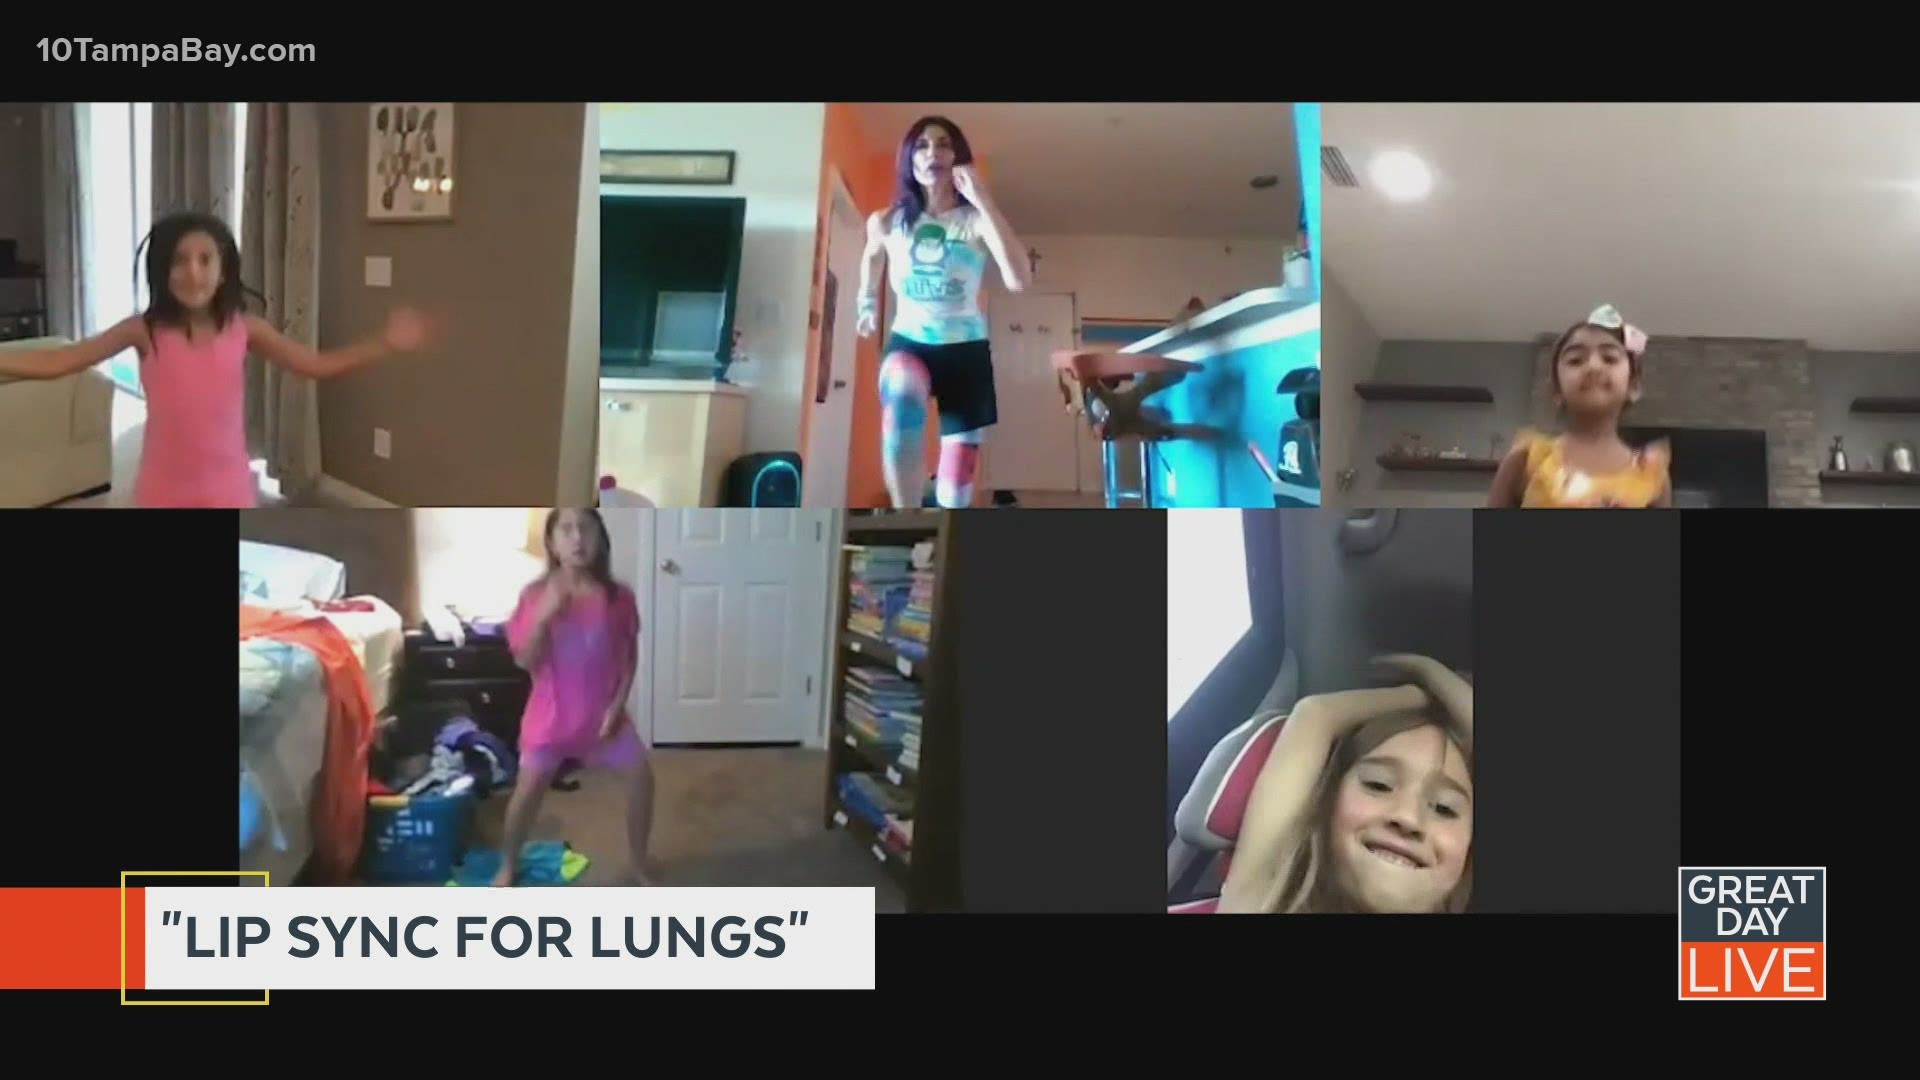 Former Bucs cheerleader to lip sync for lung health